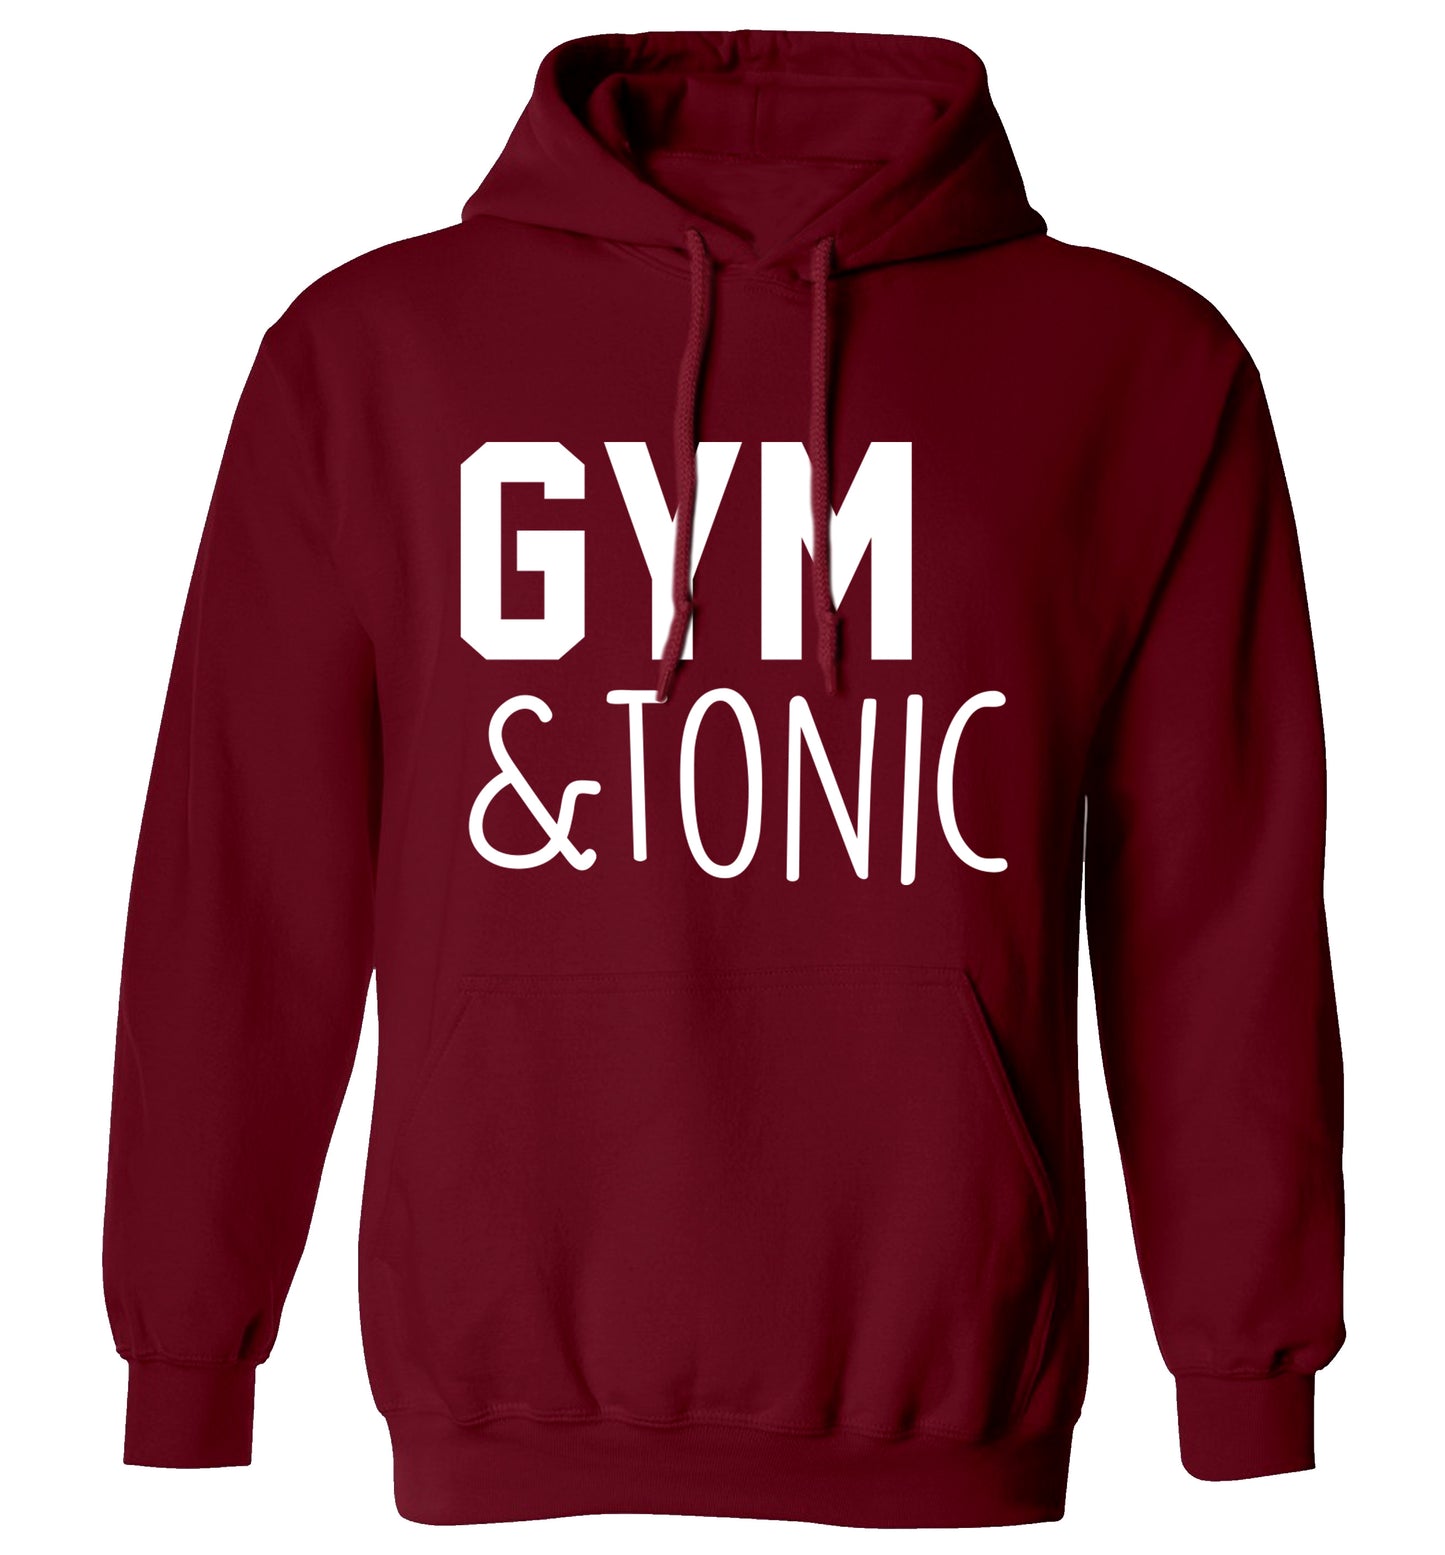 Gym and tonic adults unisex maroon hoodie 2XL